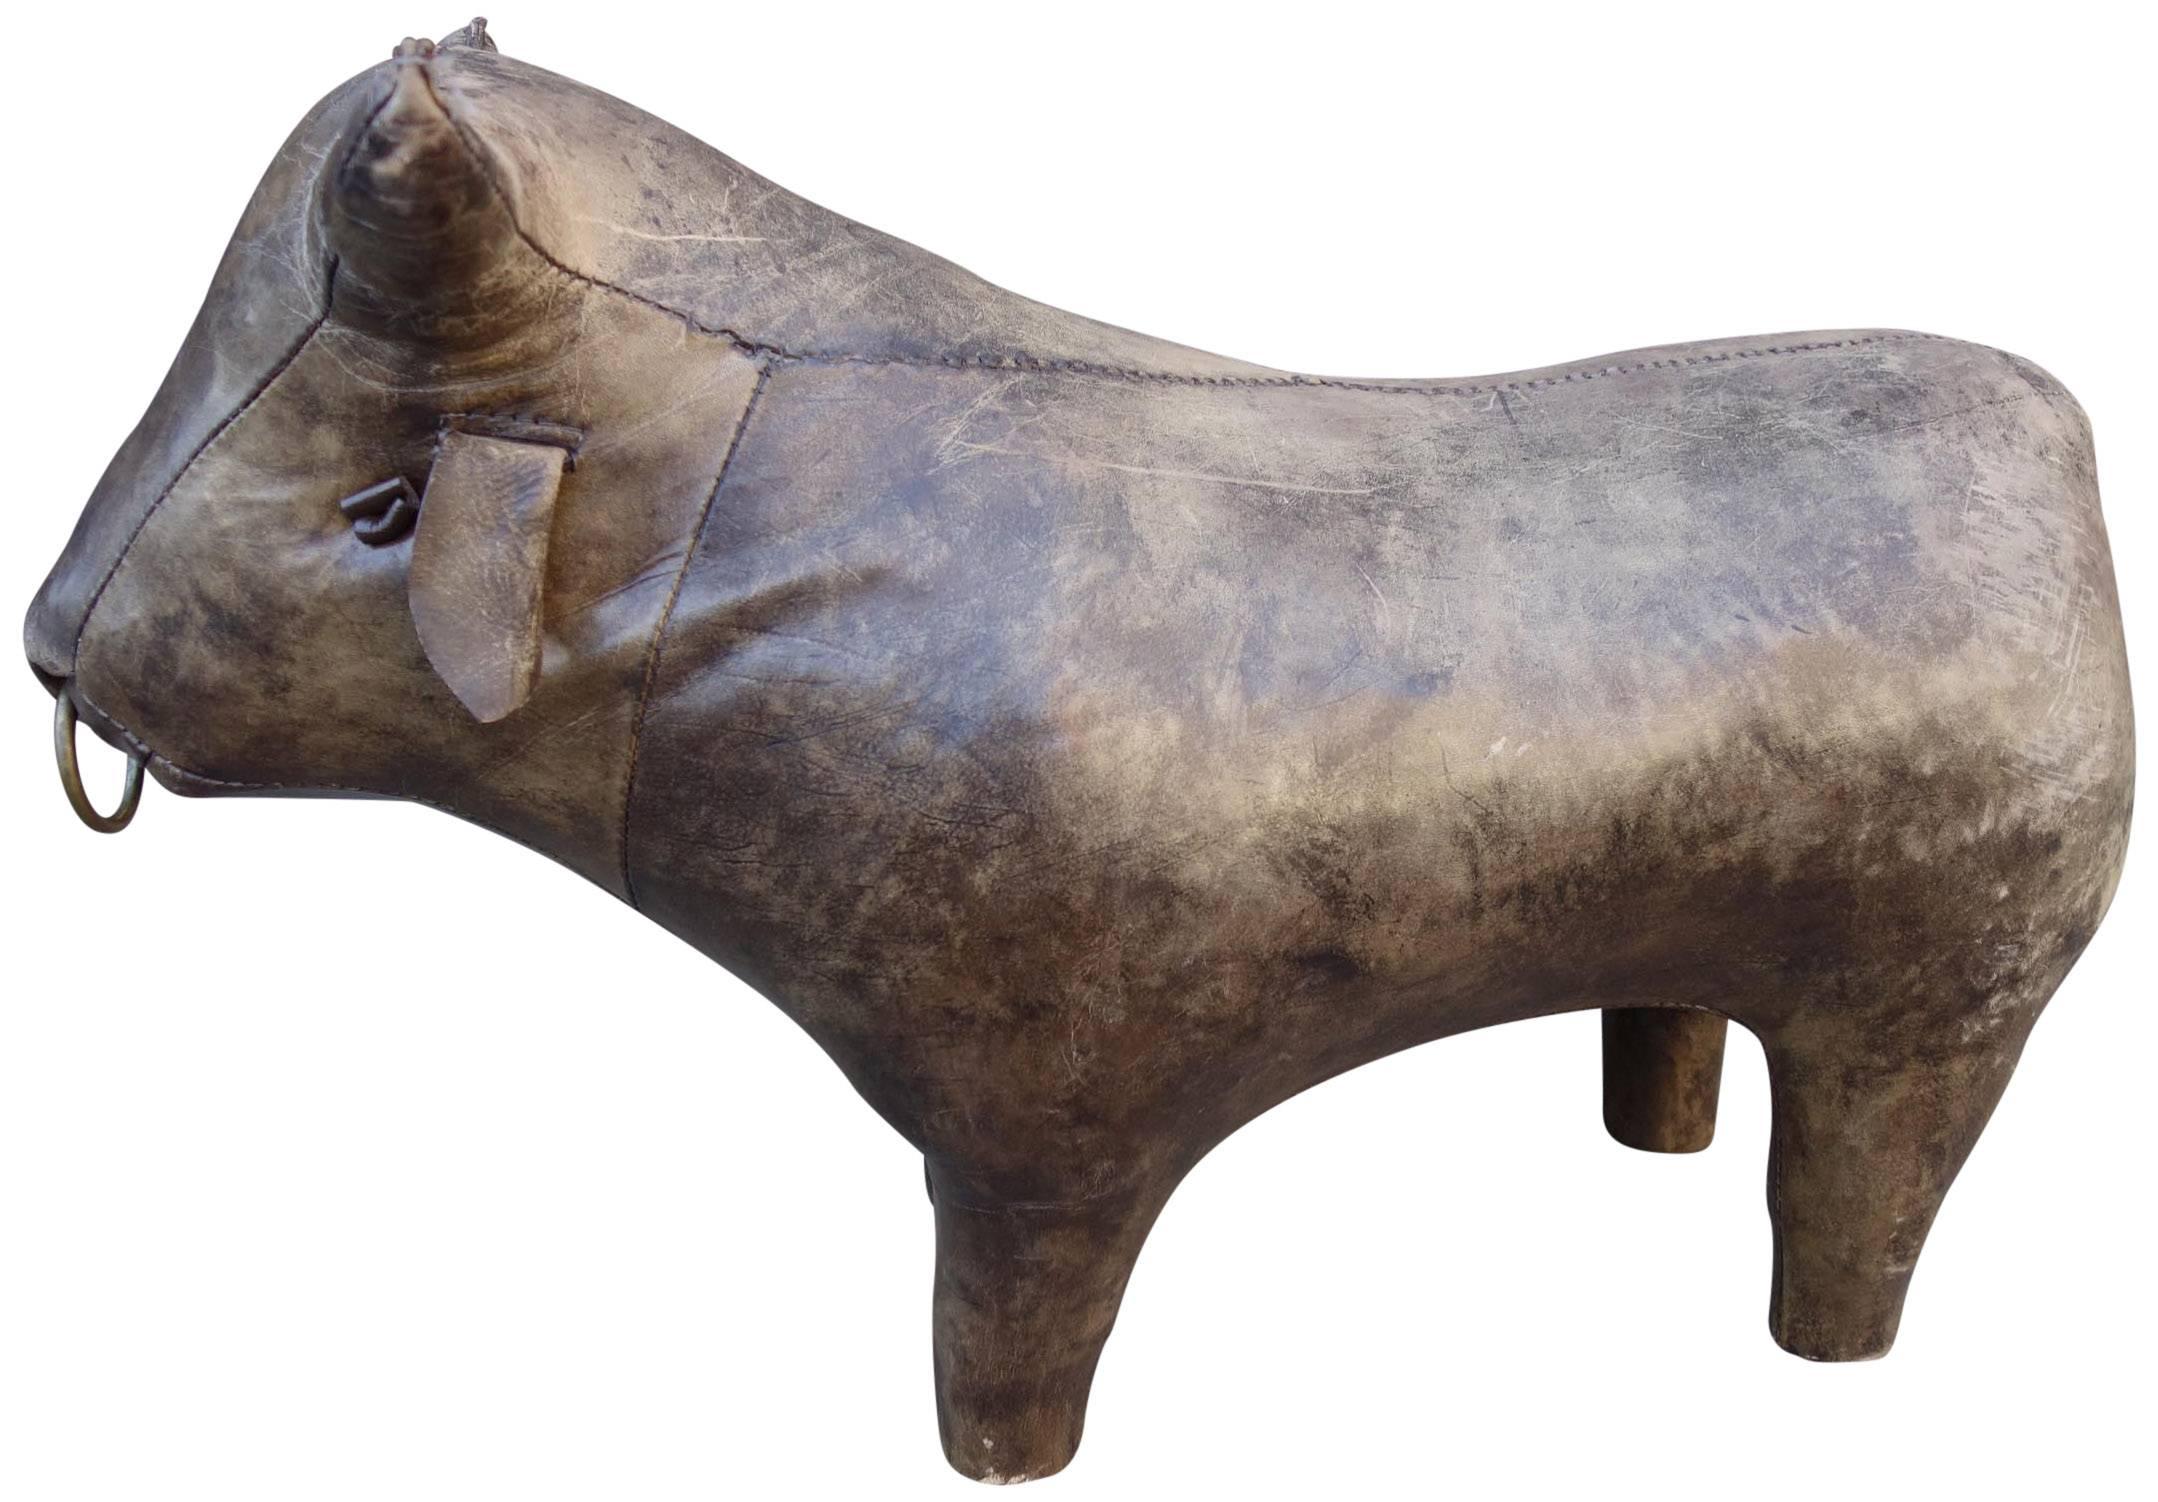 Vintage Dimitri Omersa for Abercrombie & Fitch leather bull footstool or ottoman. Wonderful decorative item to have in a room. Lost his tail otherwise in excellent vintage condition.